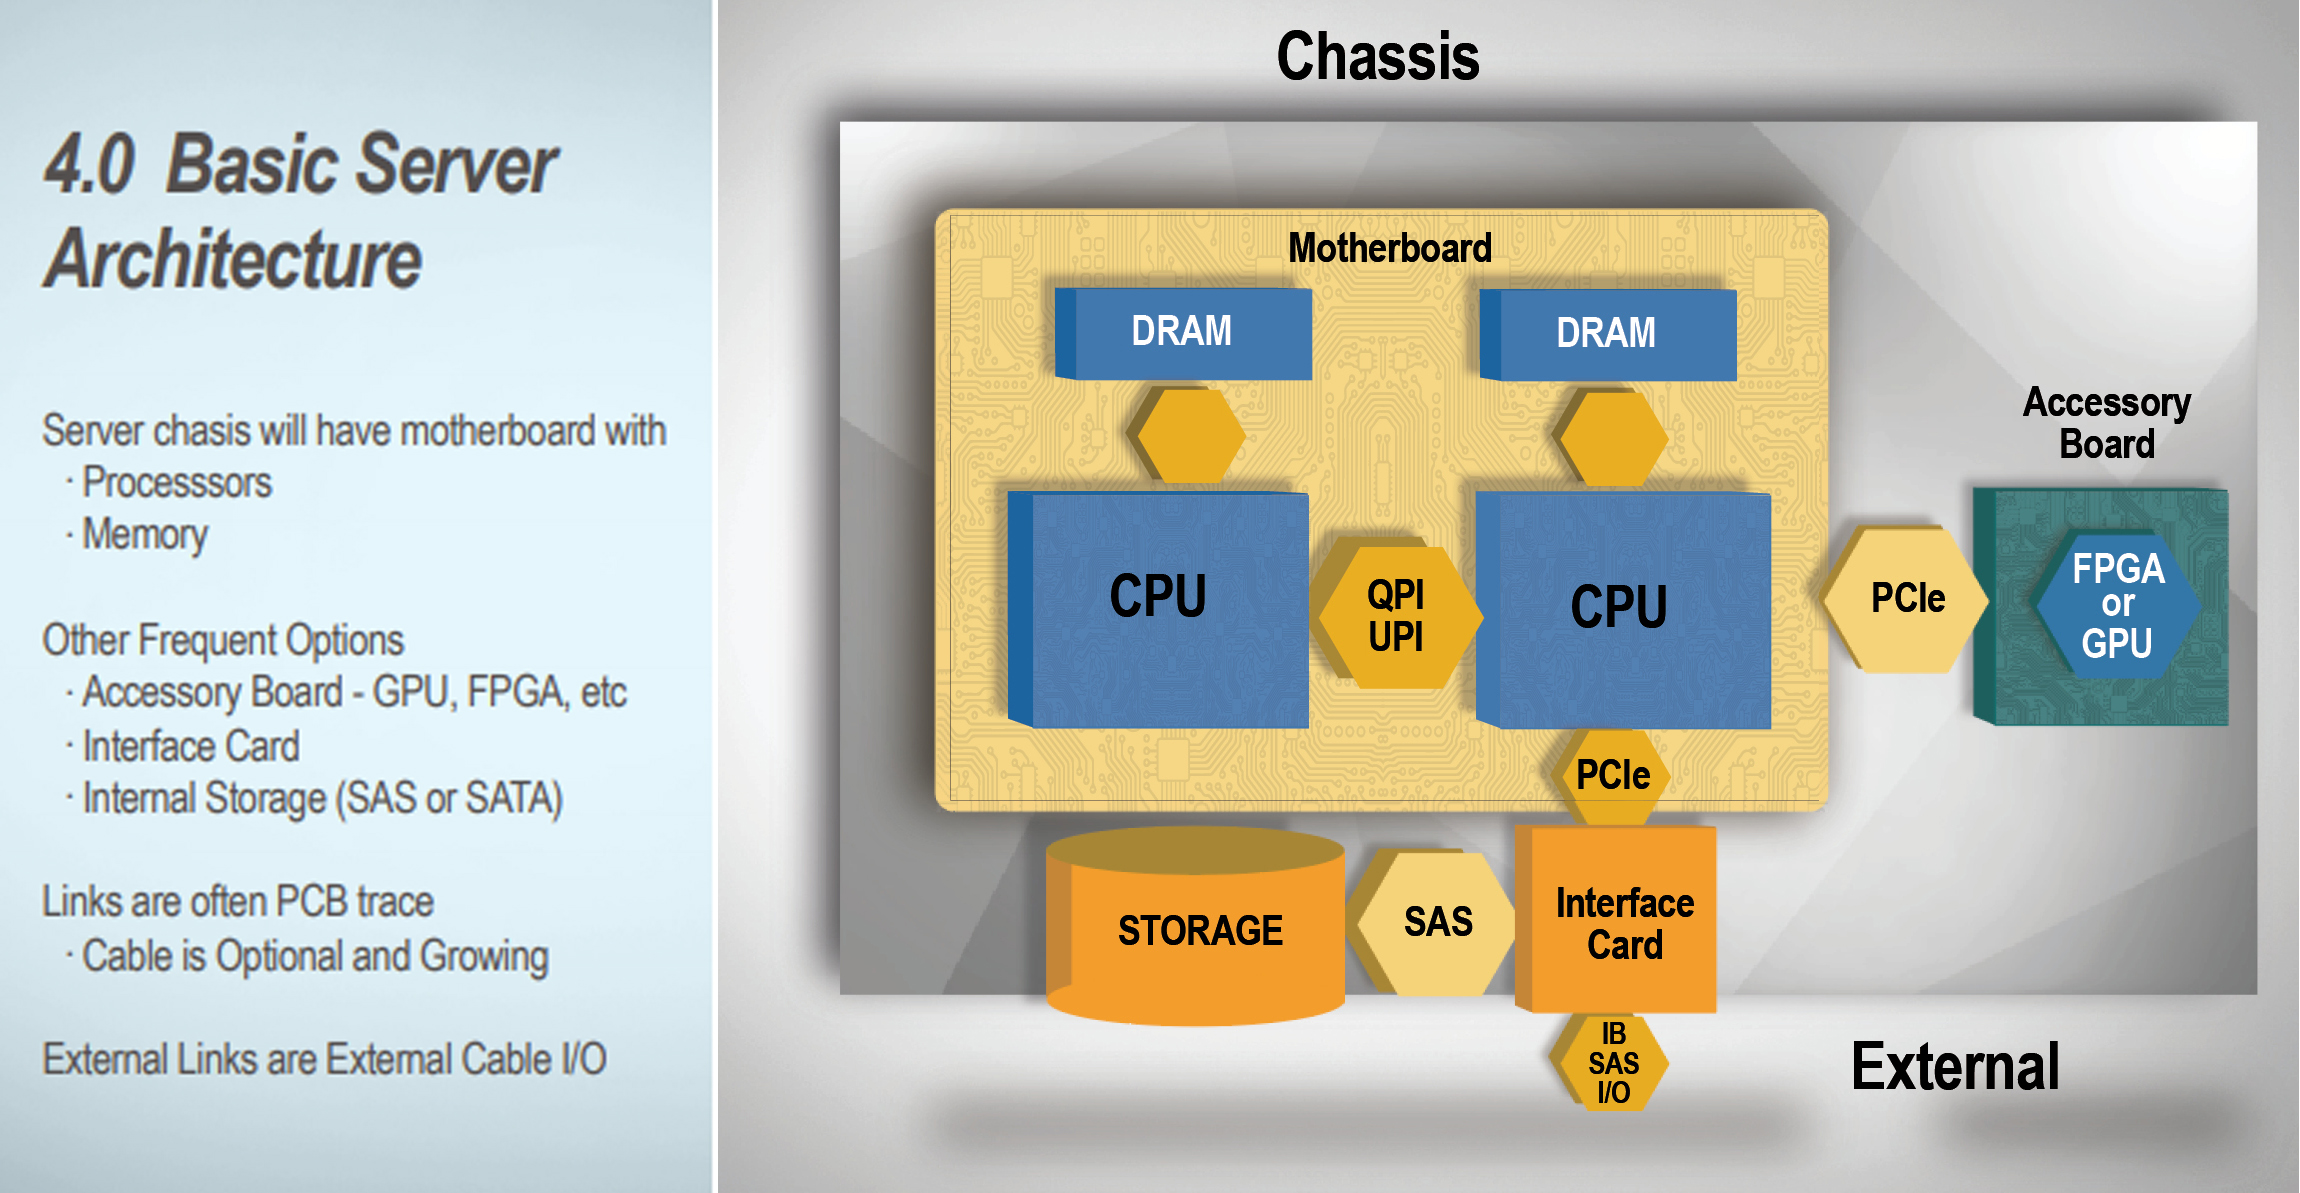 Server Architecture and Chassis